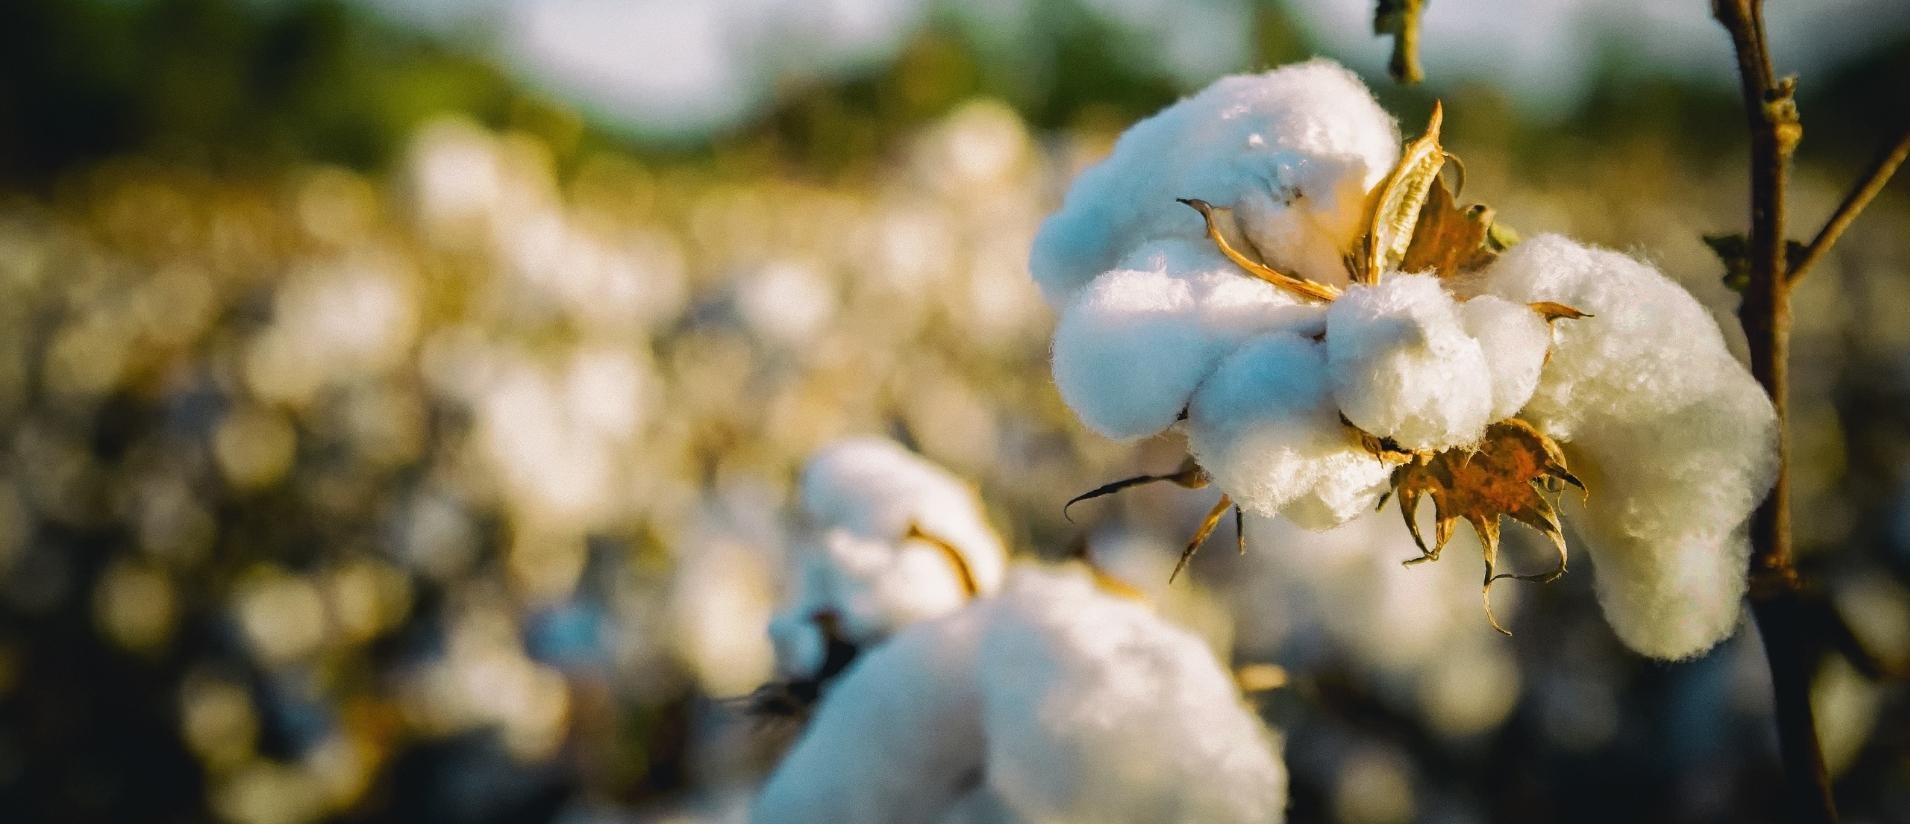 Cotton Suppliers, Traders and Distributors